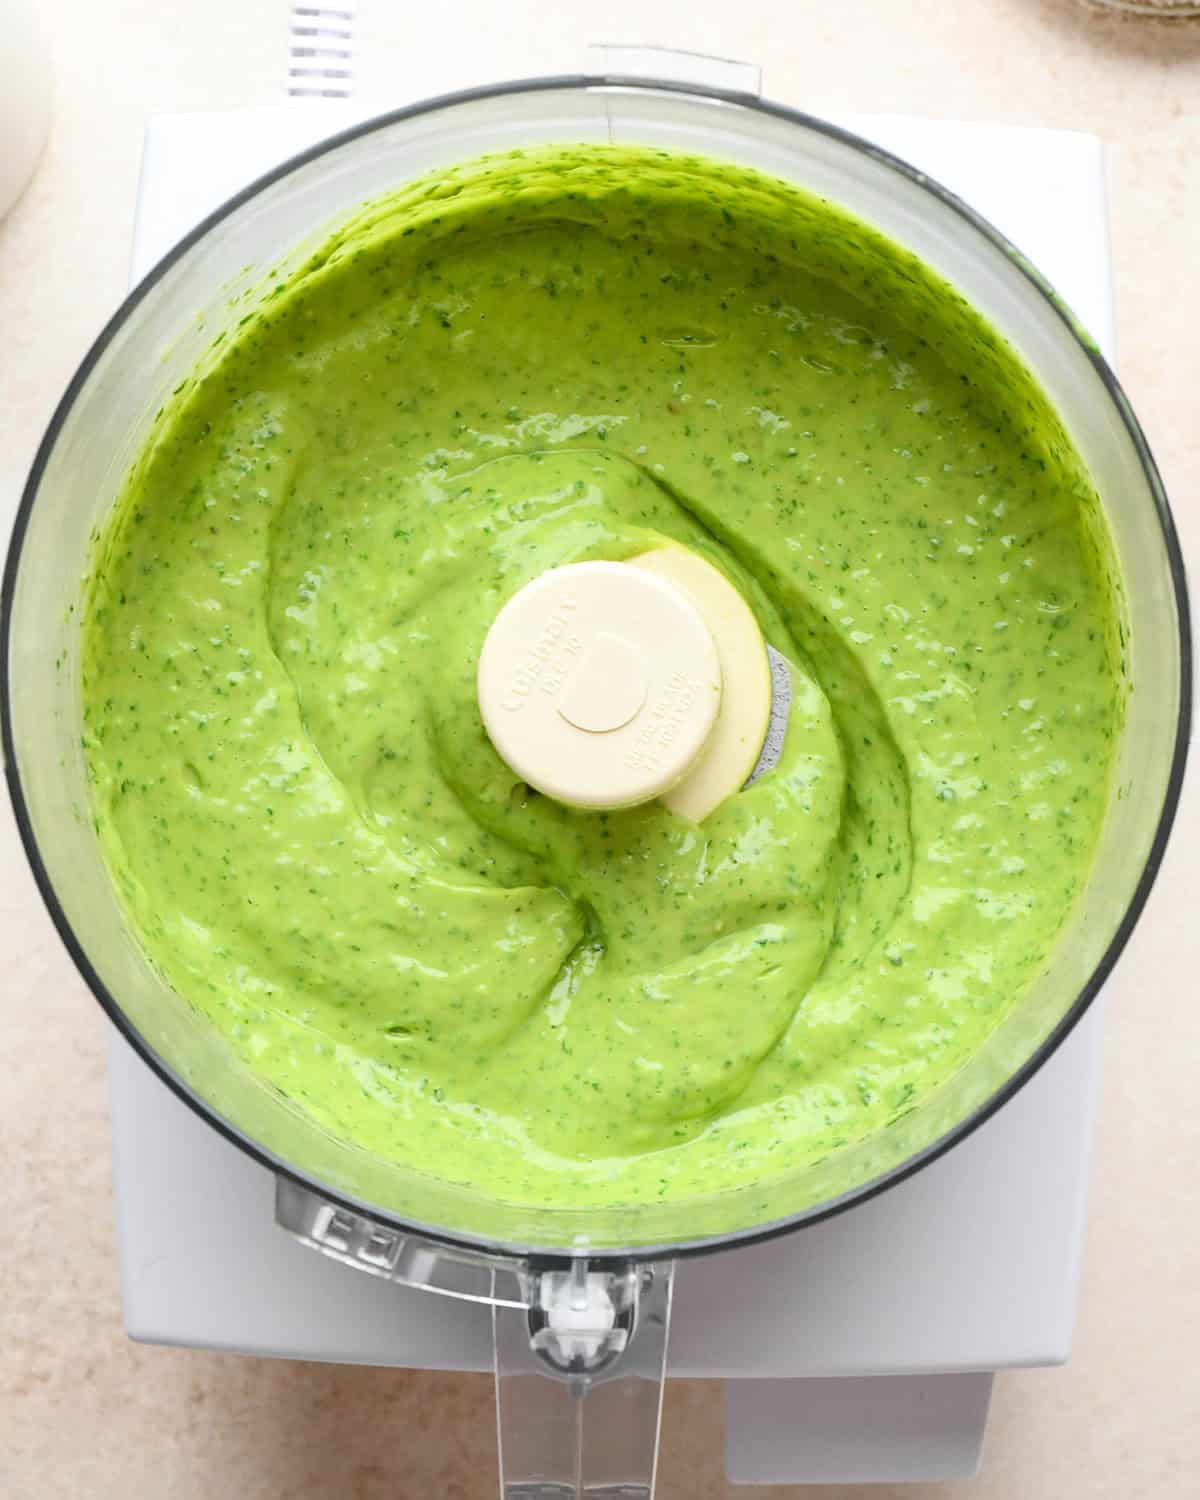 How to Make Avocado Pasta Sauce - sauce in a food processor after mixing